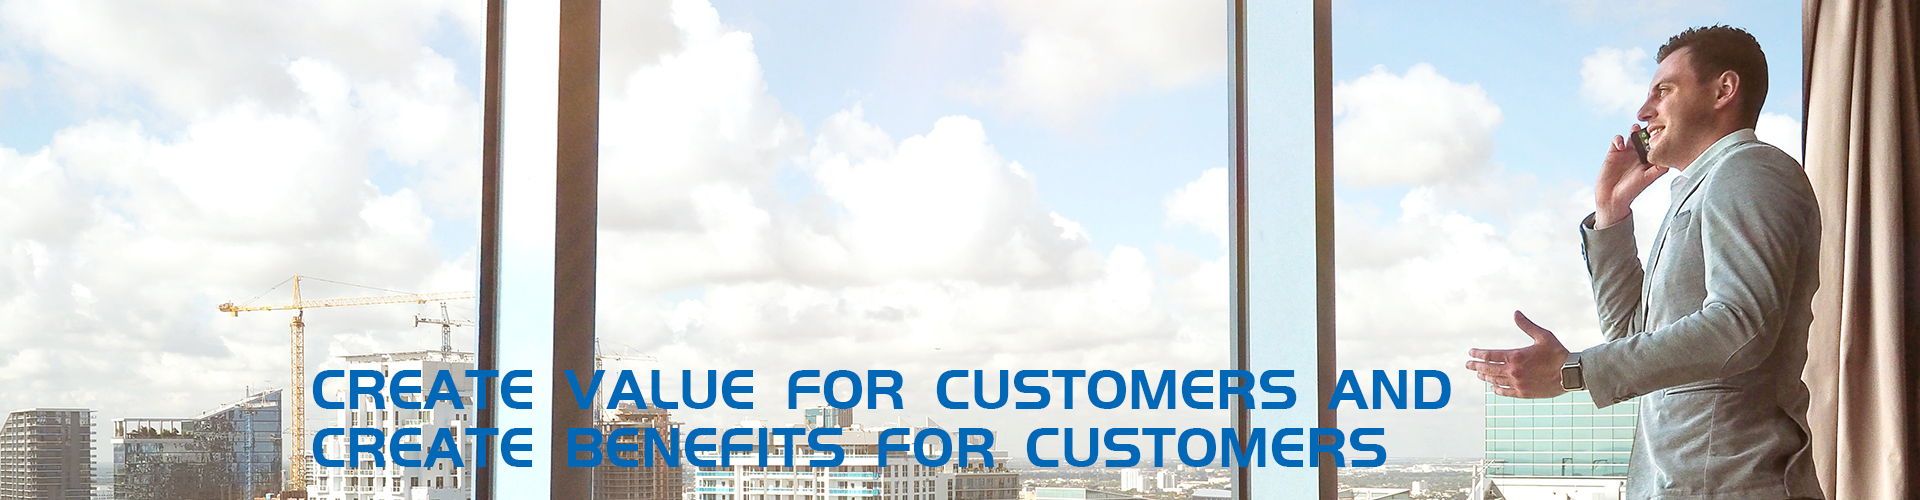 CREATE VALUE FOR CUSTONERS AND CREARE BENEFITS FOR CUSTOMERS